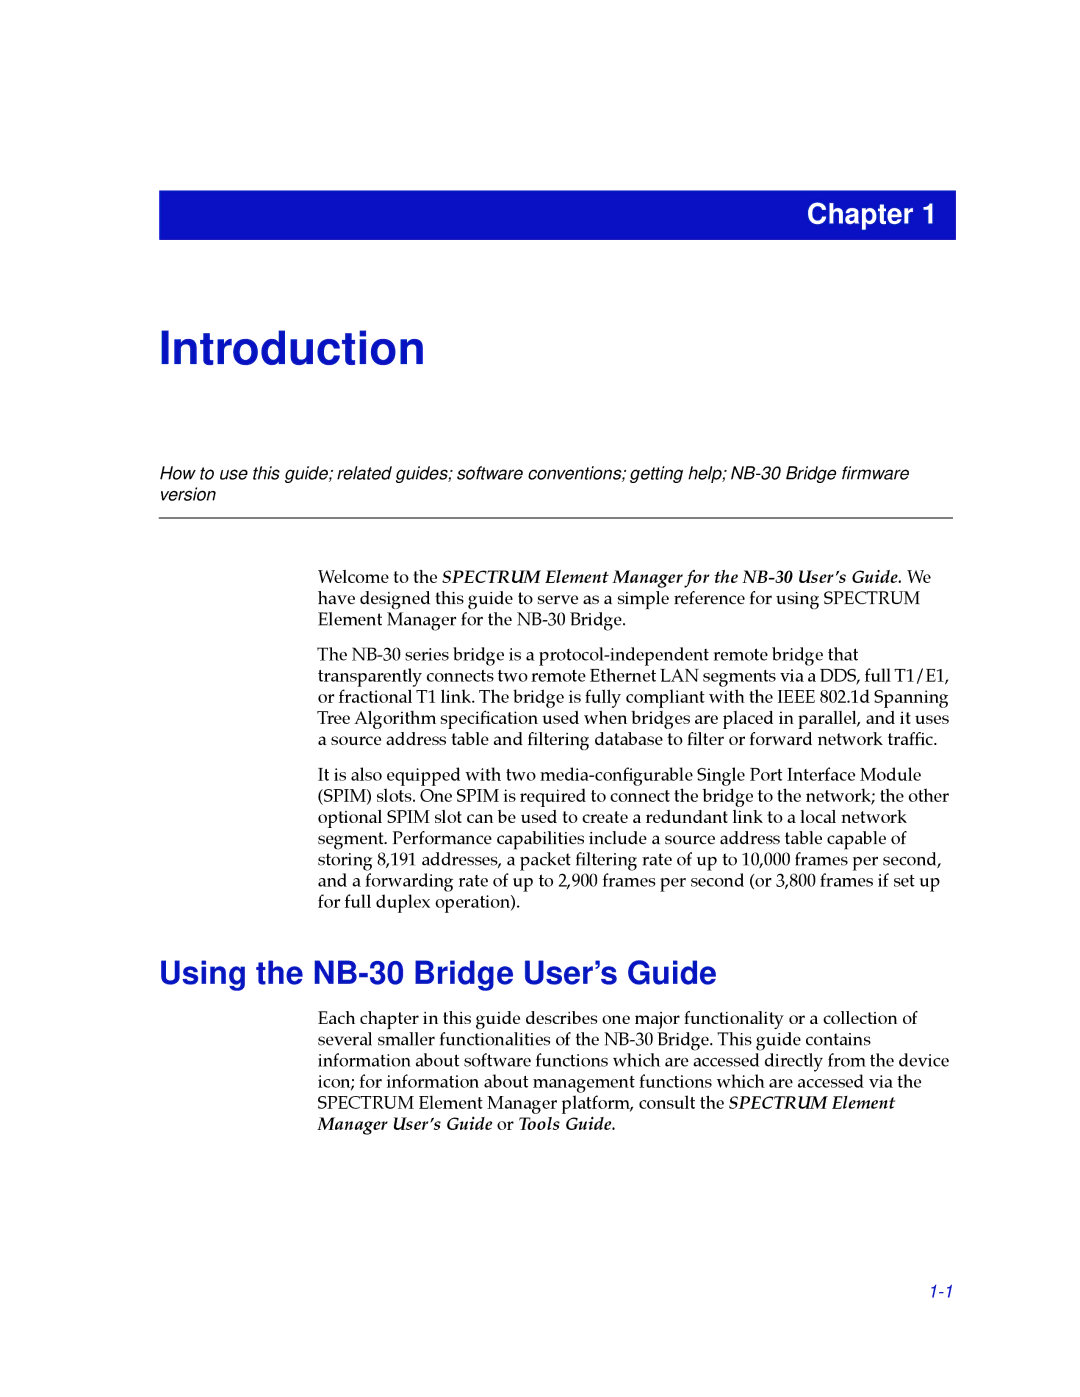 Cabletron Systems NB30 manual Introduction, Using the NB-30 Bridge User’s Guide 